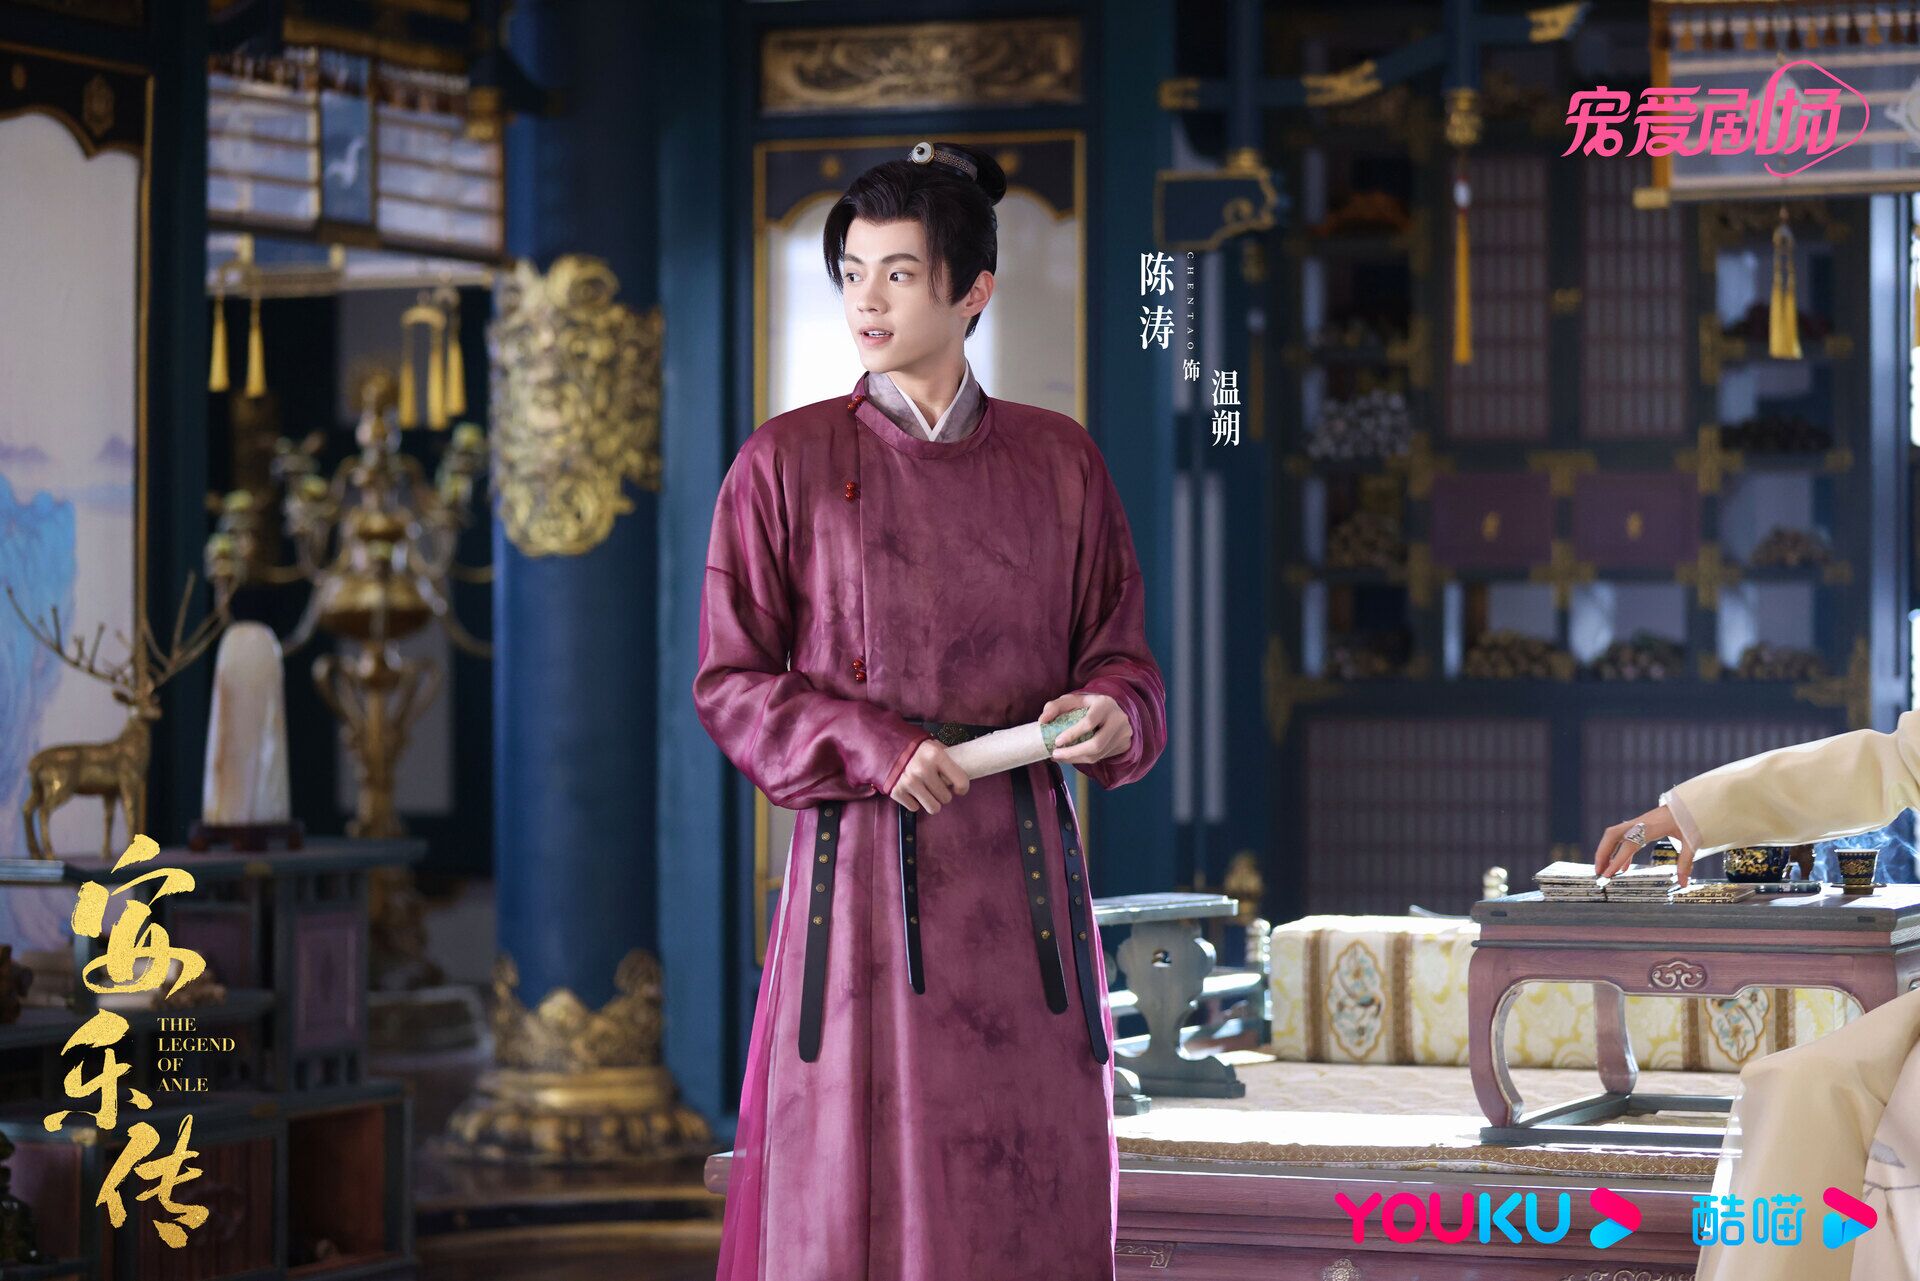 The Legend of Anle Photo with Chen Tao, HD Image, Wallpaper - CPOP HOME